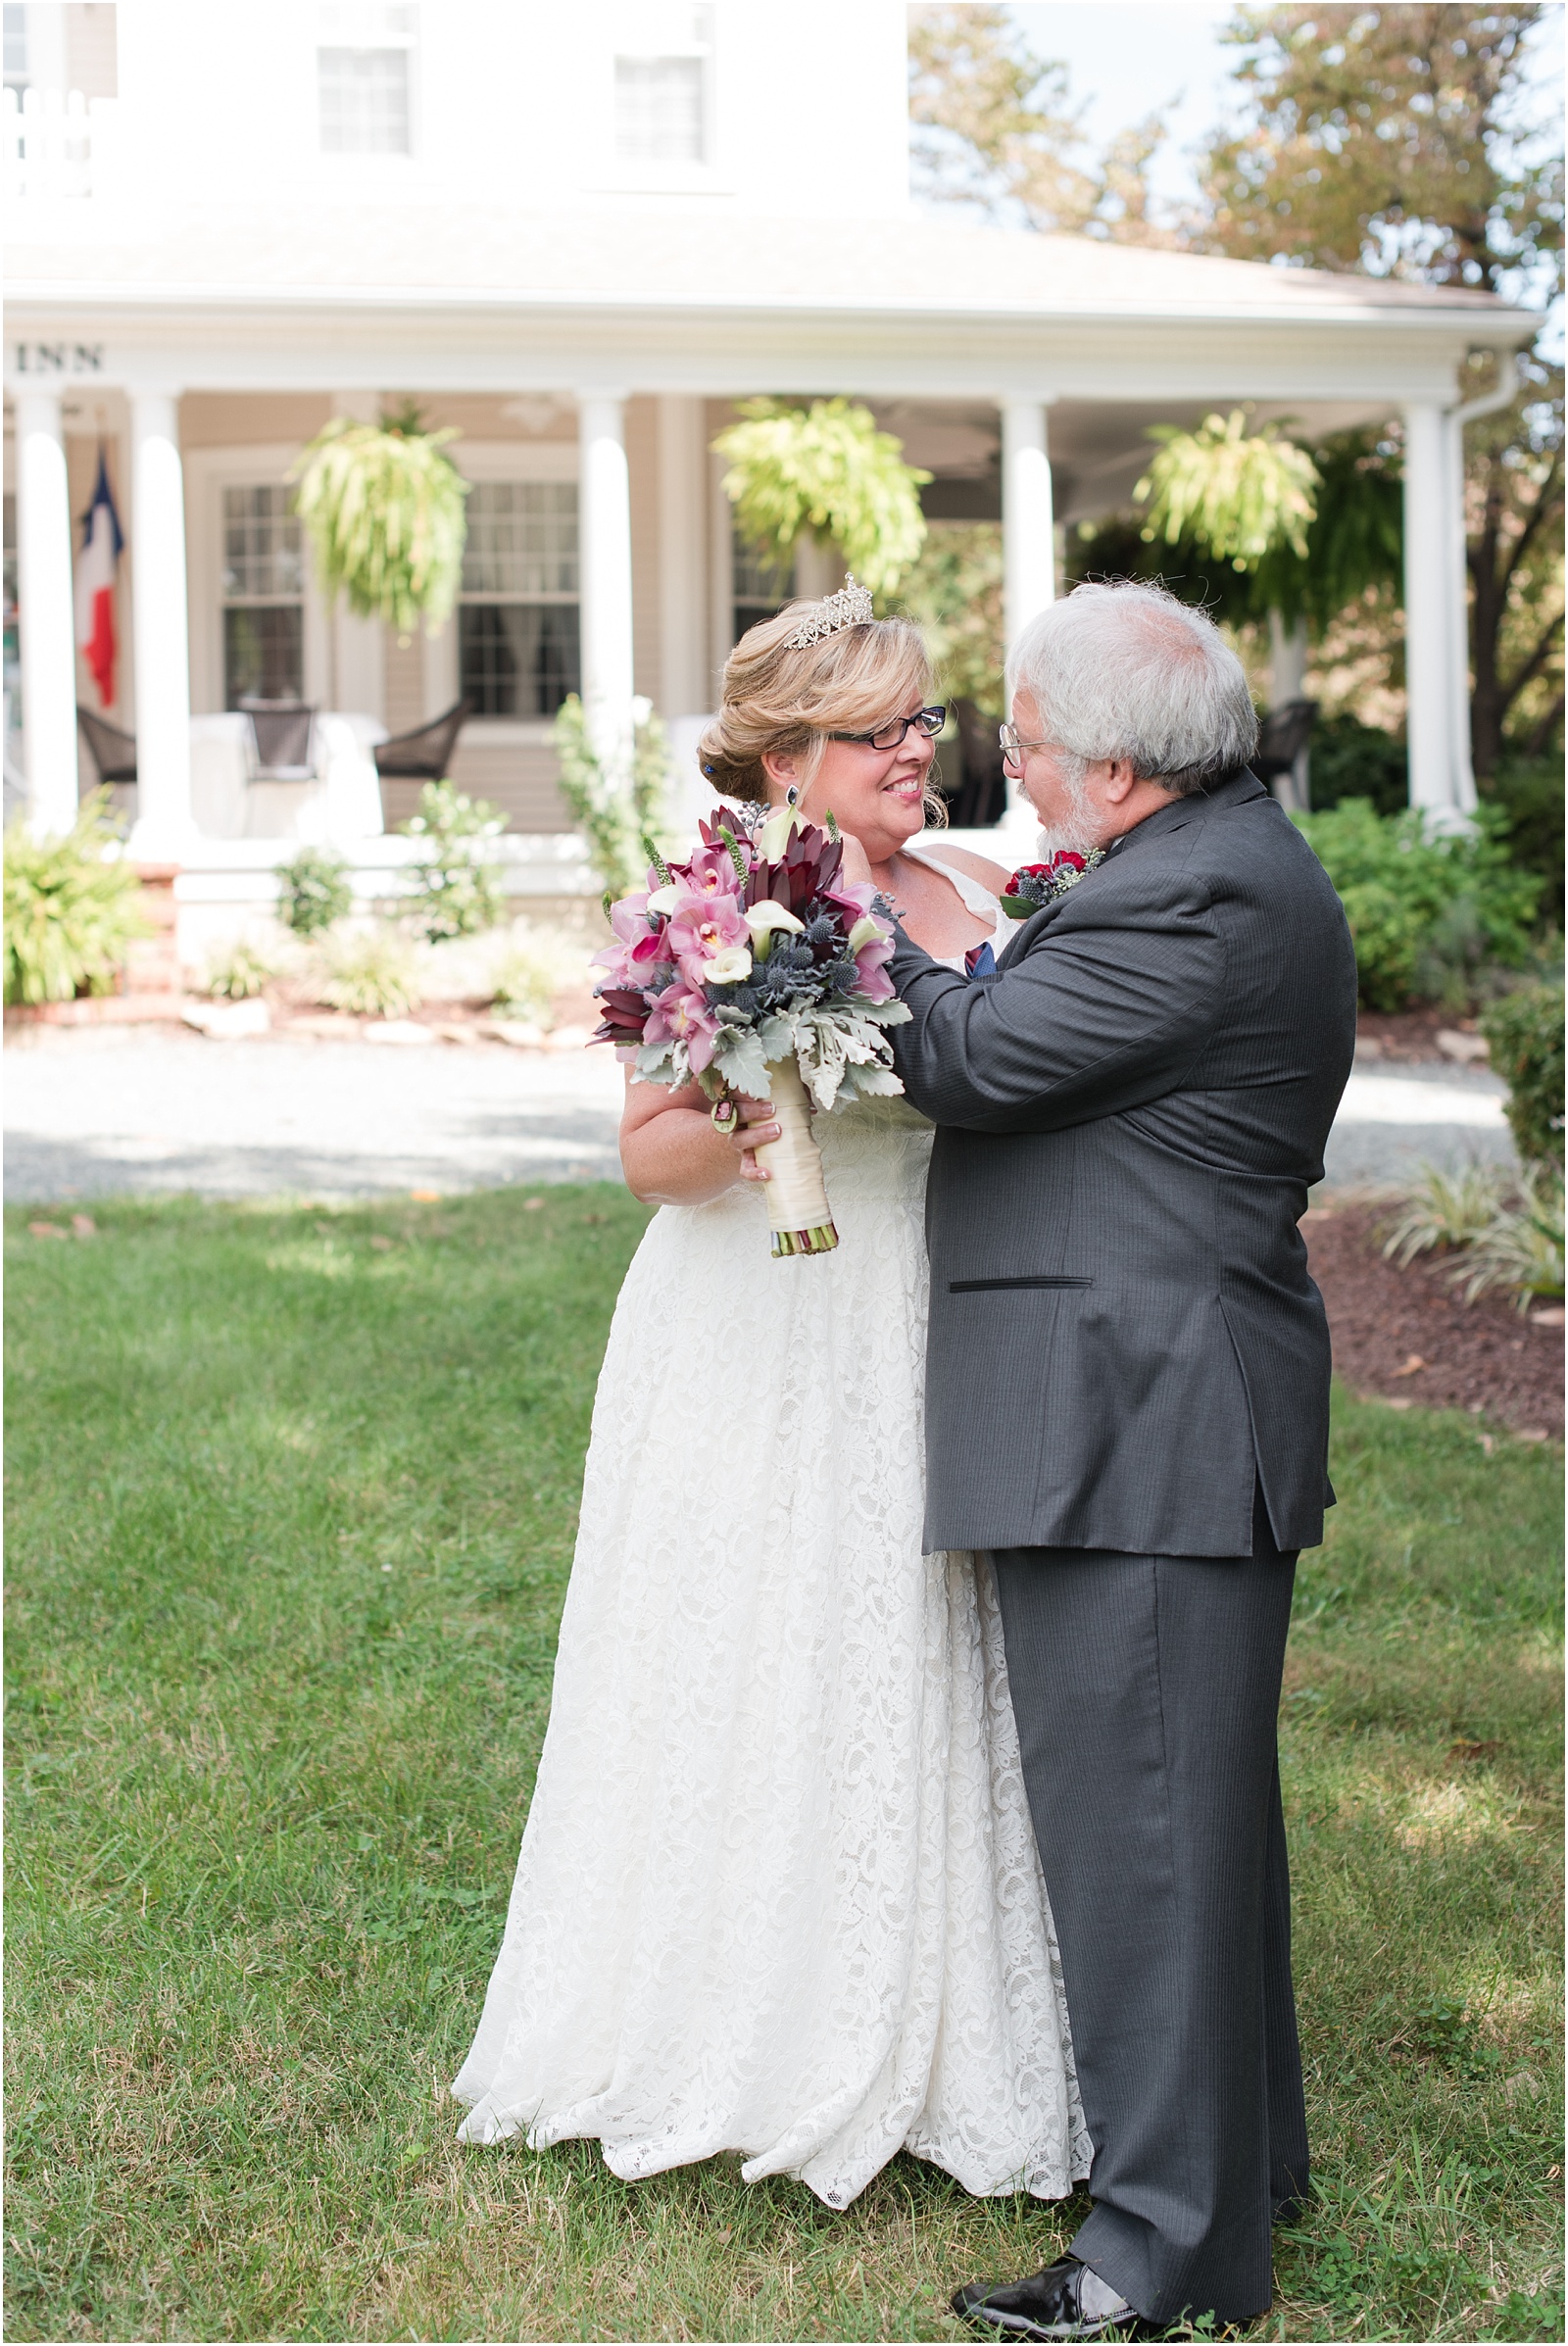 Michelle and Sara Photography, Michelle and Sara weddings, michelle robinson photography, burke manor inn, first look, bride and groom first look